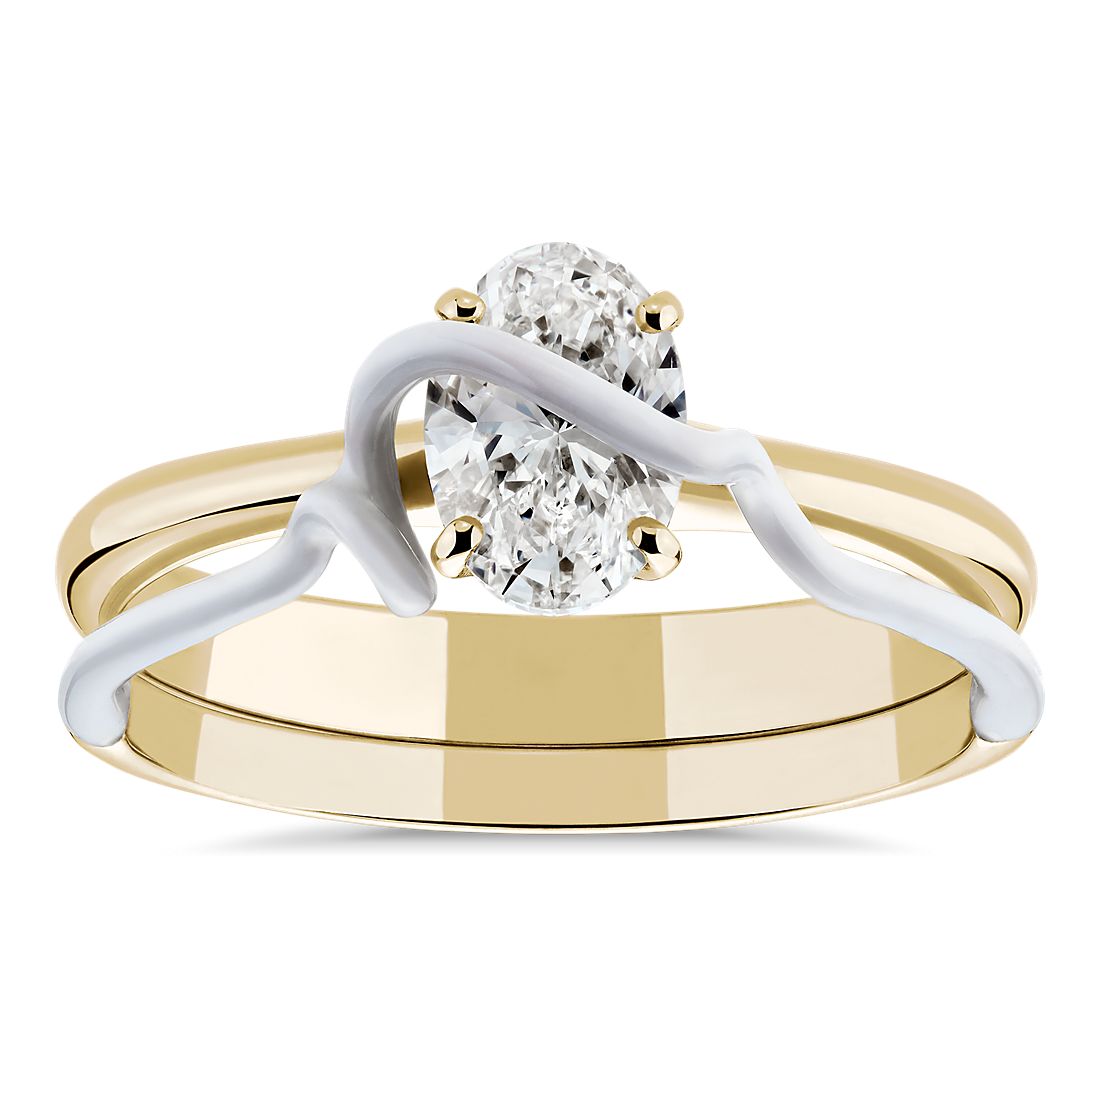 Bea Bongiasca ‘You’re So Mine’ Prong-Set Diamond Engagement Ring in Enamel and 18k Yellow Gold